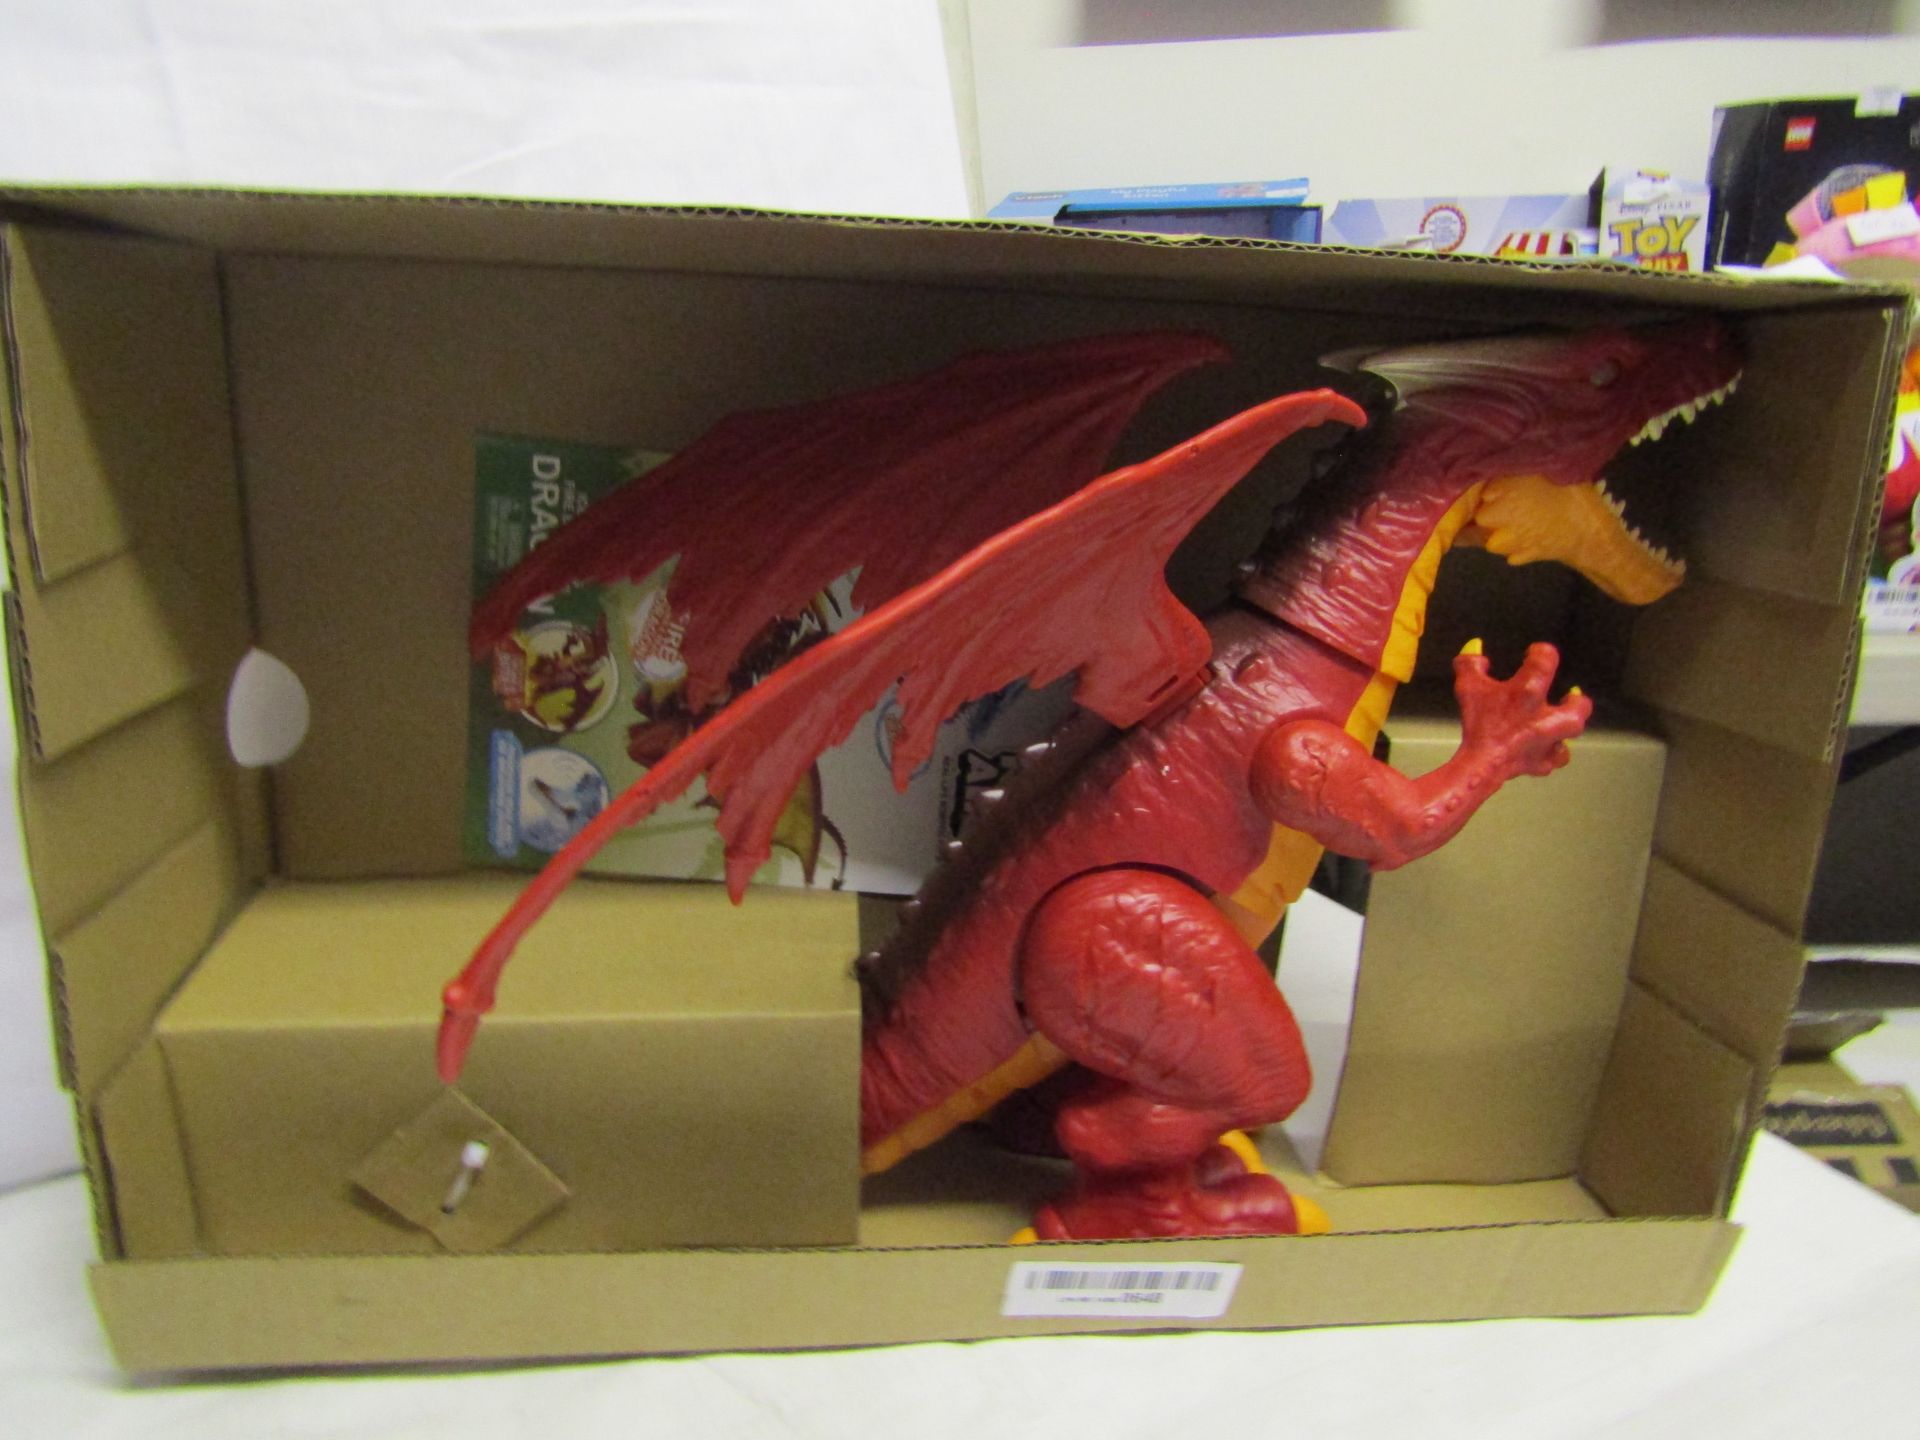 Zuru - Robo Alive Fire Breathing Dragon Toy - Unchecked, Missing Box.